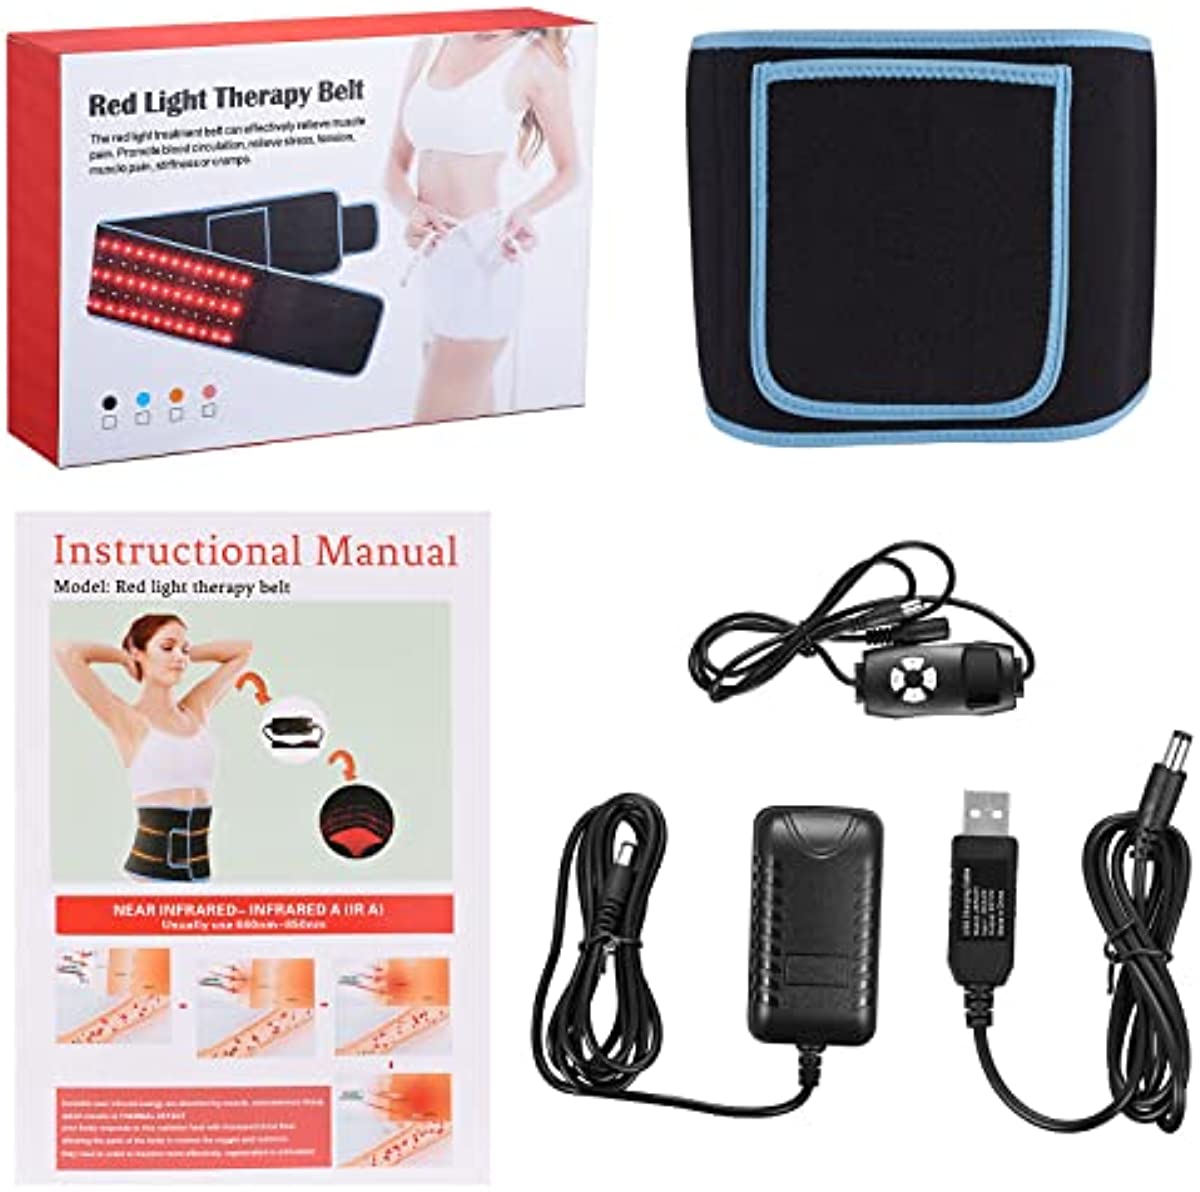 TOPQSC Infrared Red Light Therapy Belt for Pai.n Relief, 20W Homeuse Wearable Infrared Light Therapy Pad for Back Shoulder Joints Muscle Pai.n Relief, Massager Equipment